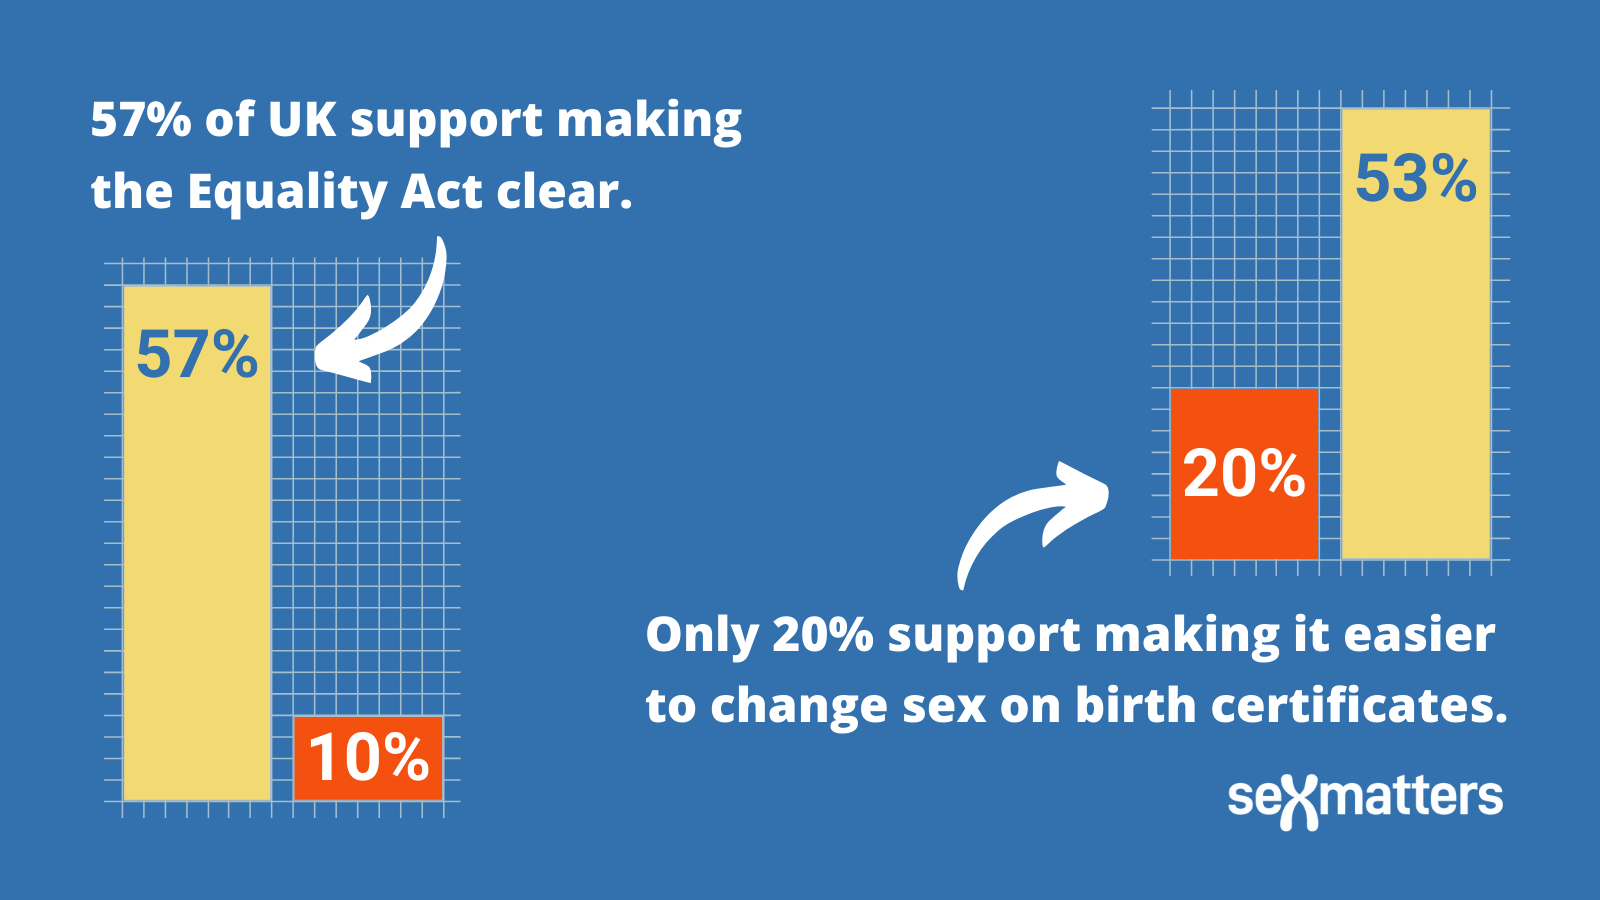 57% of UK support making the Equality Act clear. Only 20% support making it easier to change sex on birth certificates.